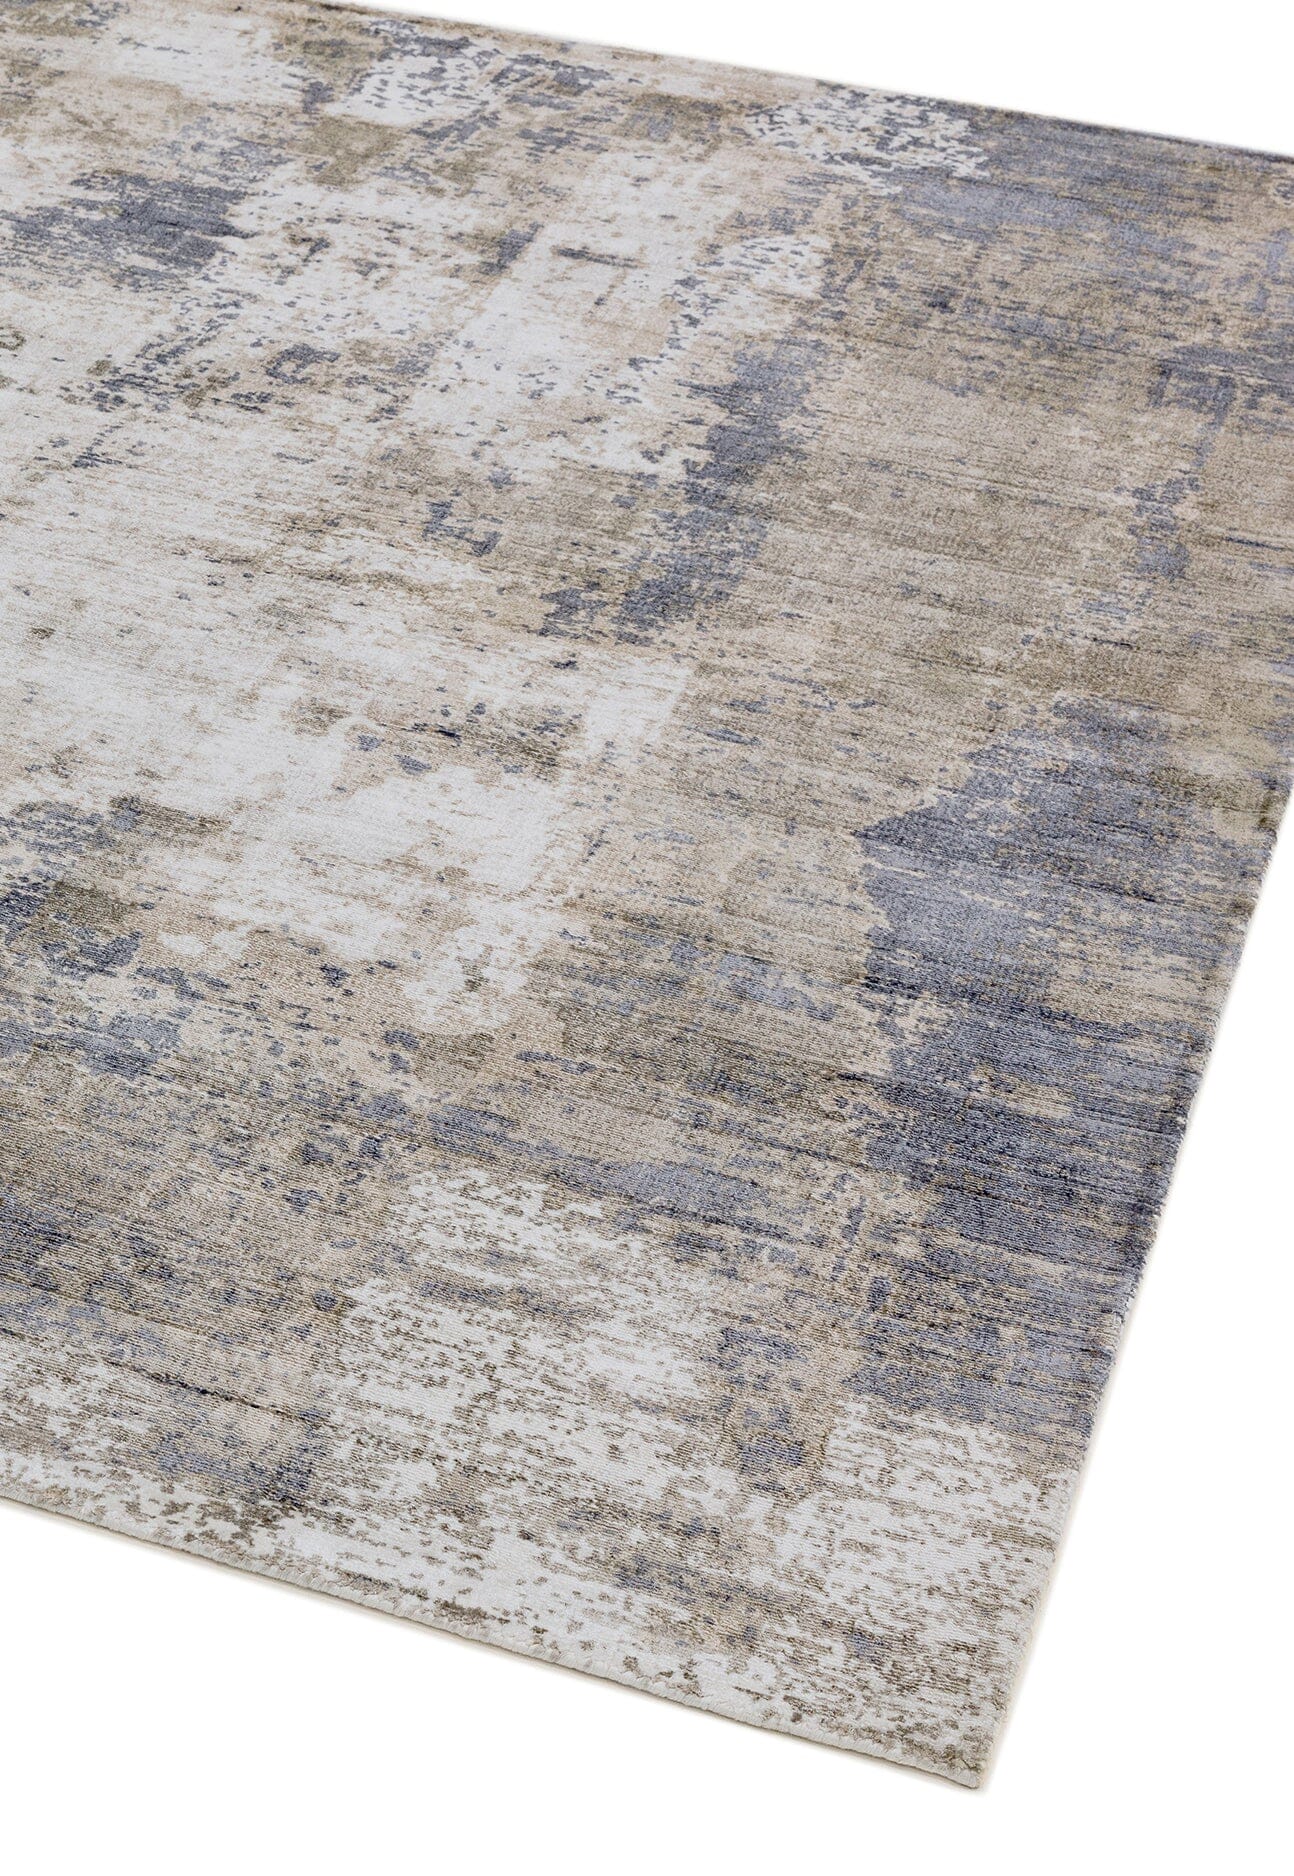  Asiatic Carpets-Asiatic Carpets Gatsby Hand Woven Rug Cloud - 160 x 230cm-Grey, Silver 813 